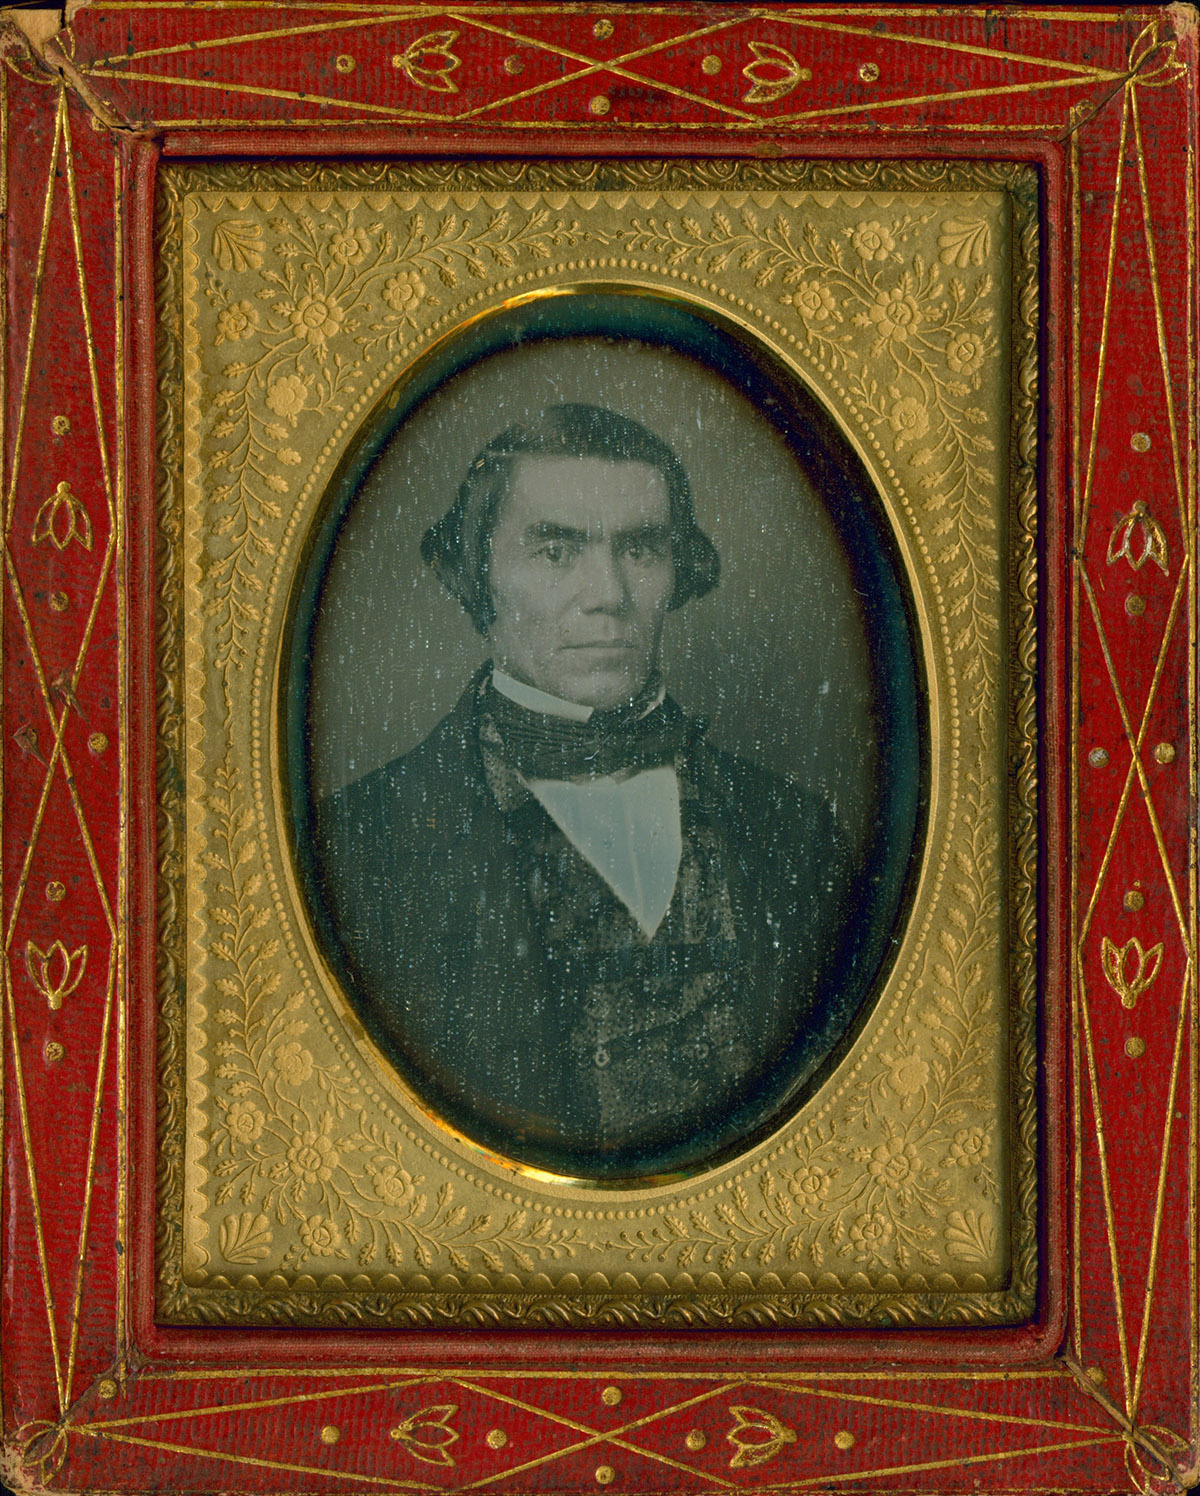 Daguerreotype portrait of Silas Armstrong, n.d., image courtesy of Kansas Room Special Collections, Kansas City Kansas, Public Library